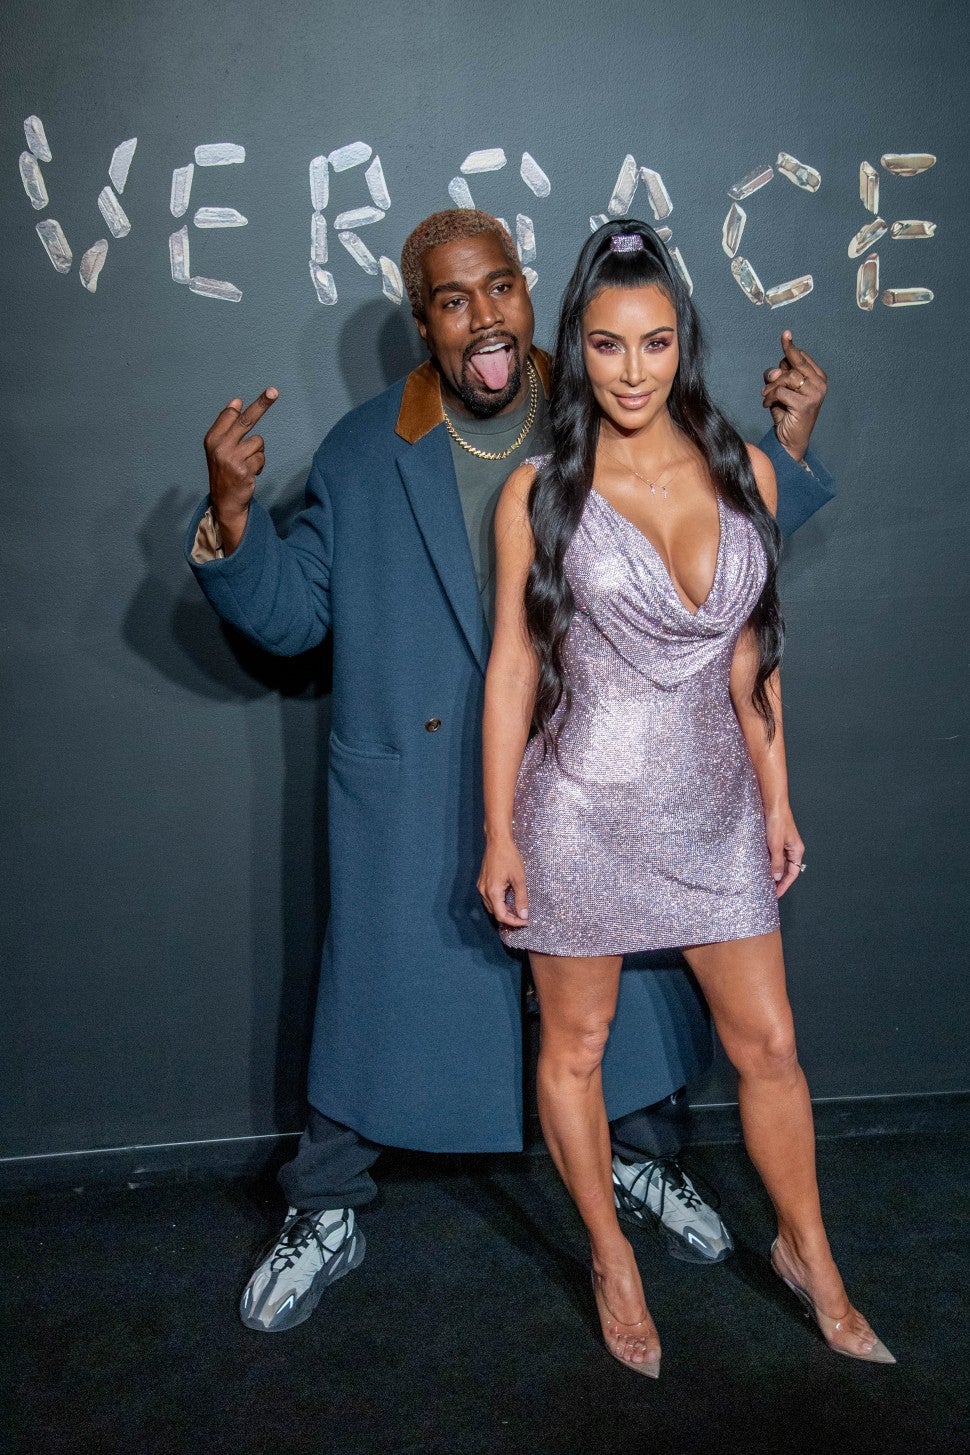 Kanye West and Kim Kardashian West attend the the Versace fall 2019 fashion show at the American Stock Exchange Building in lower Manhattan on December 02, 2018 in New York City.